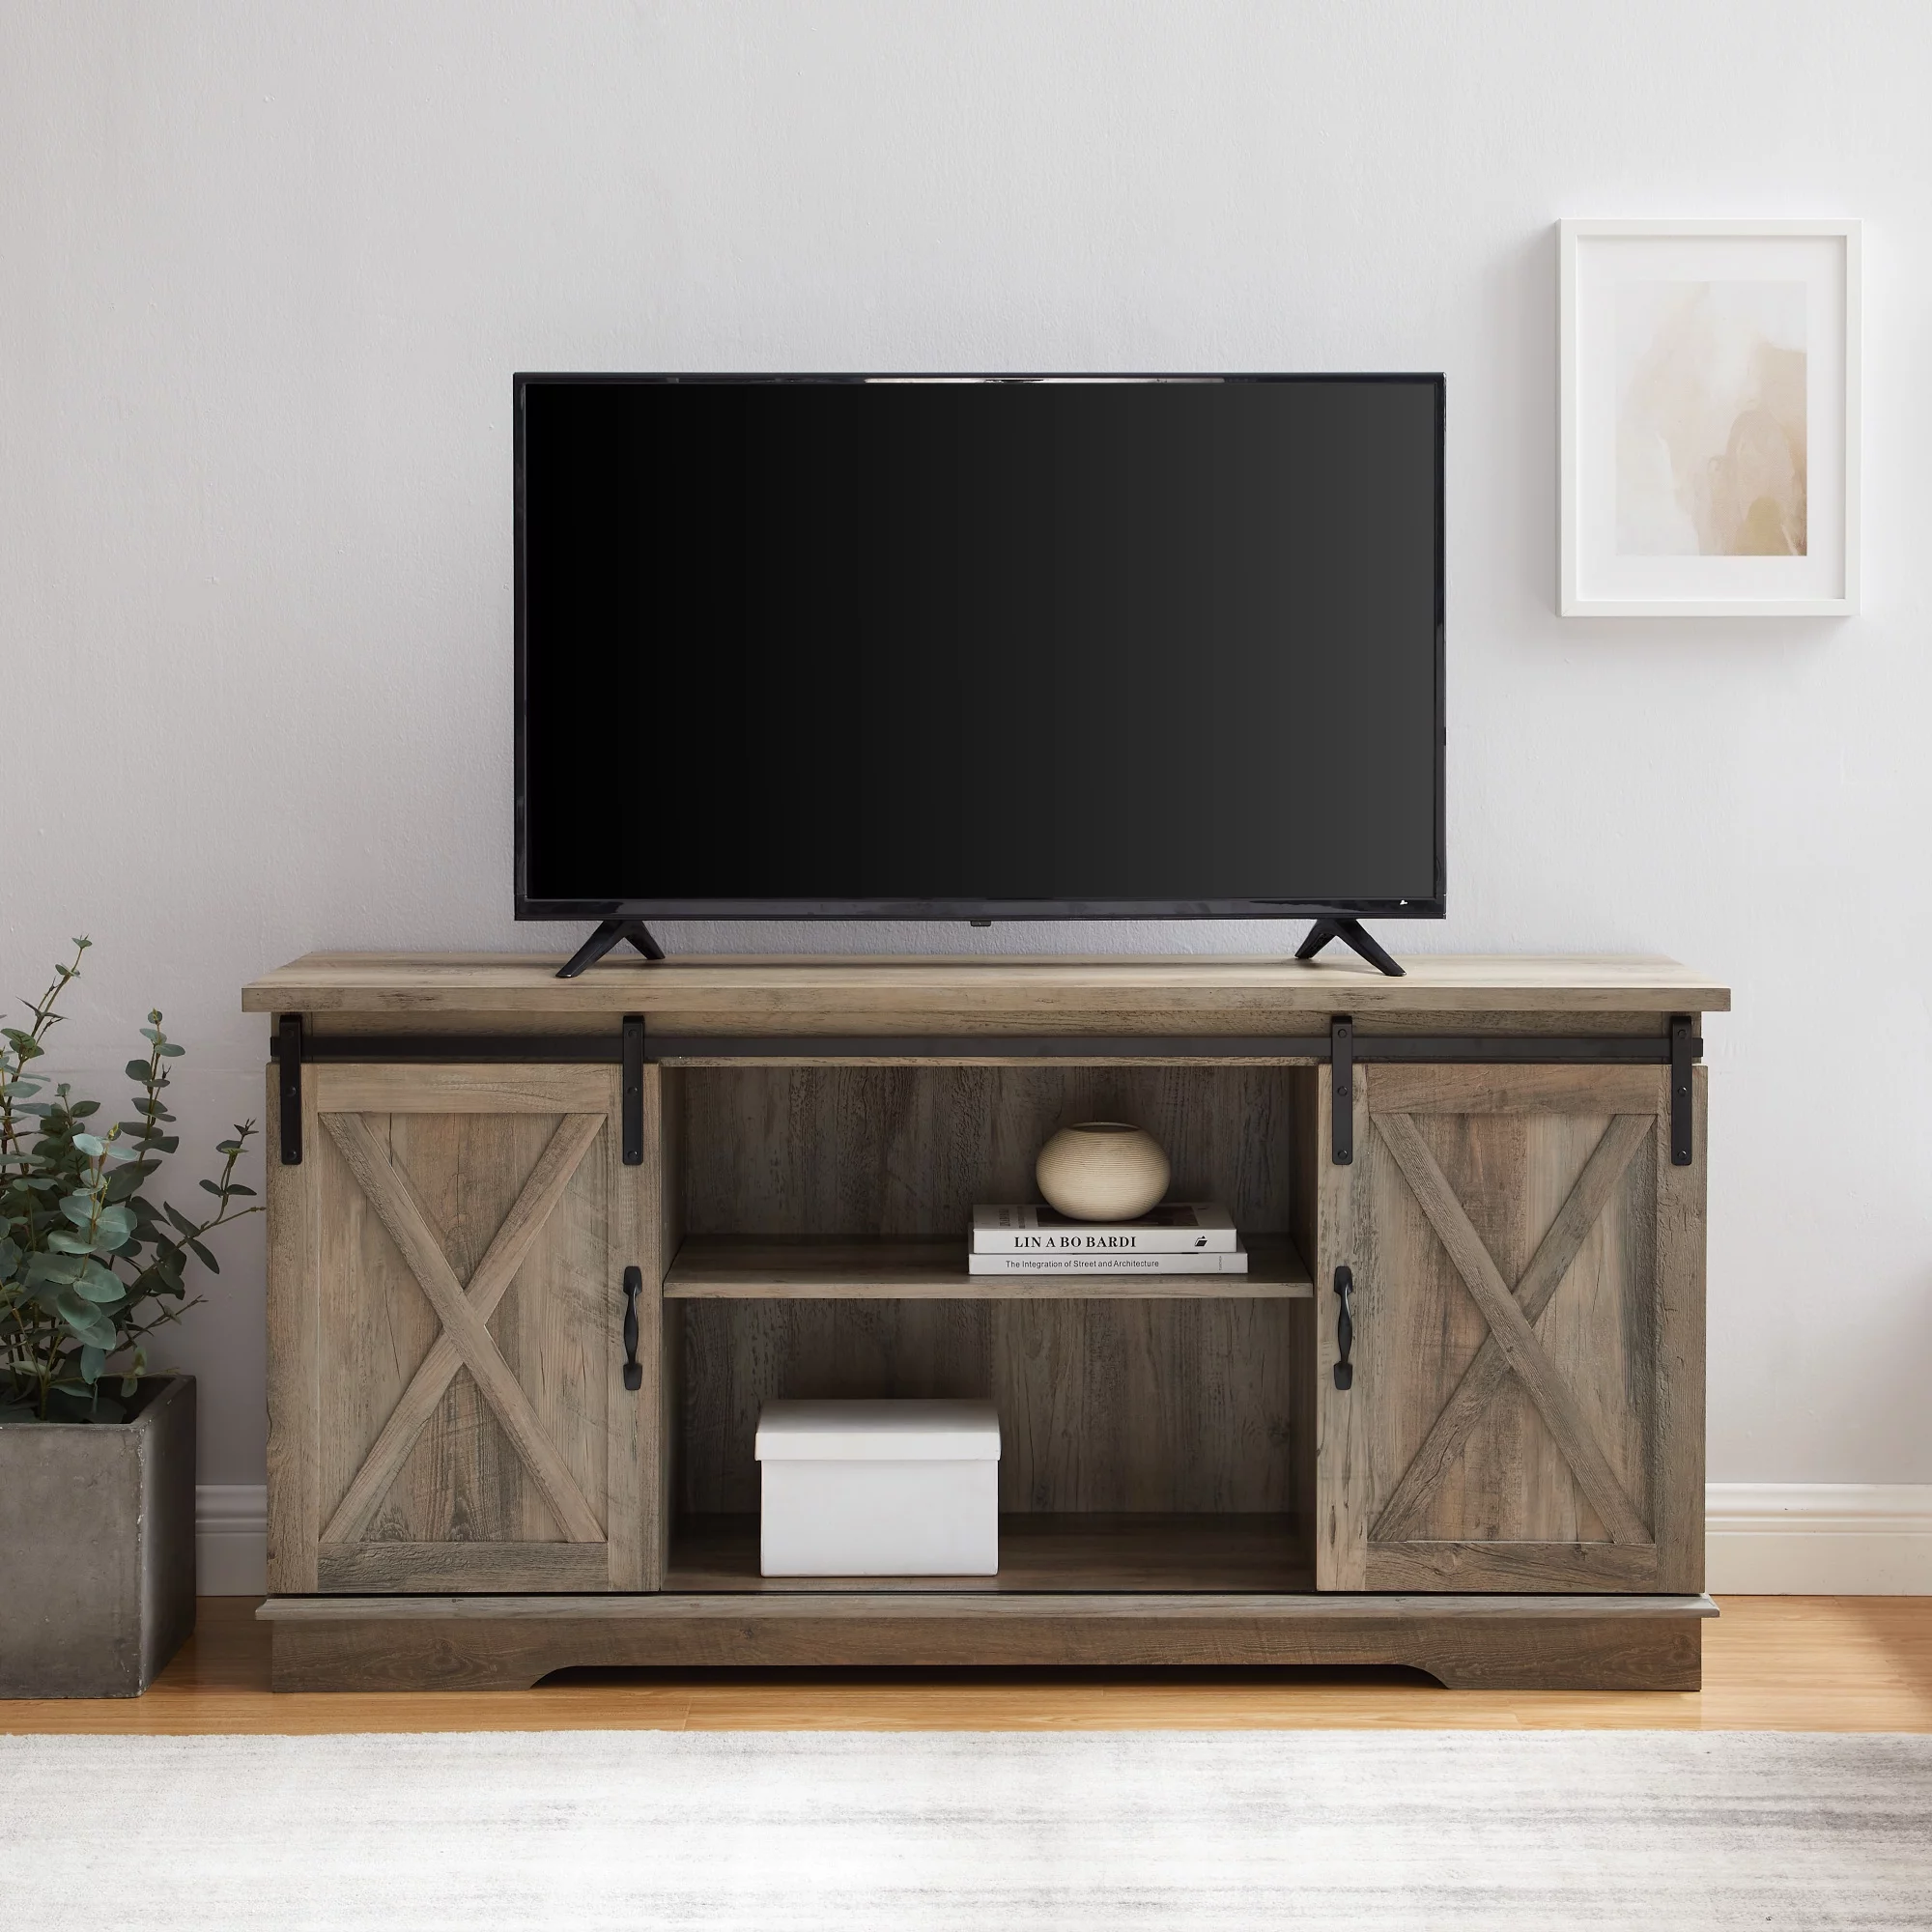 Woven Paths Sliding Farmhouse Barn Door TV Stand for TVs up to 65", Grey Wash